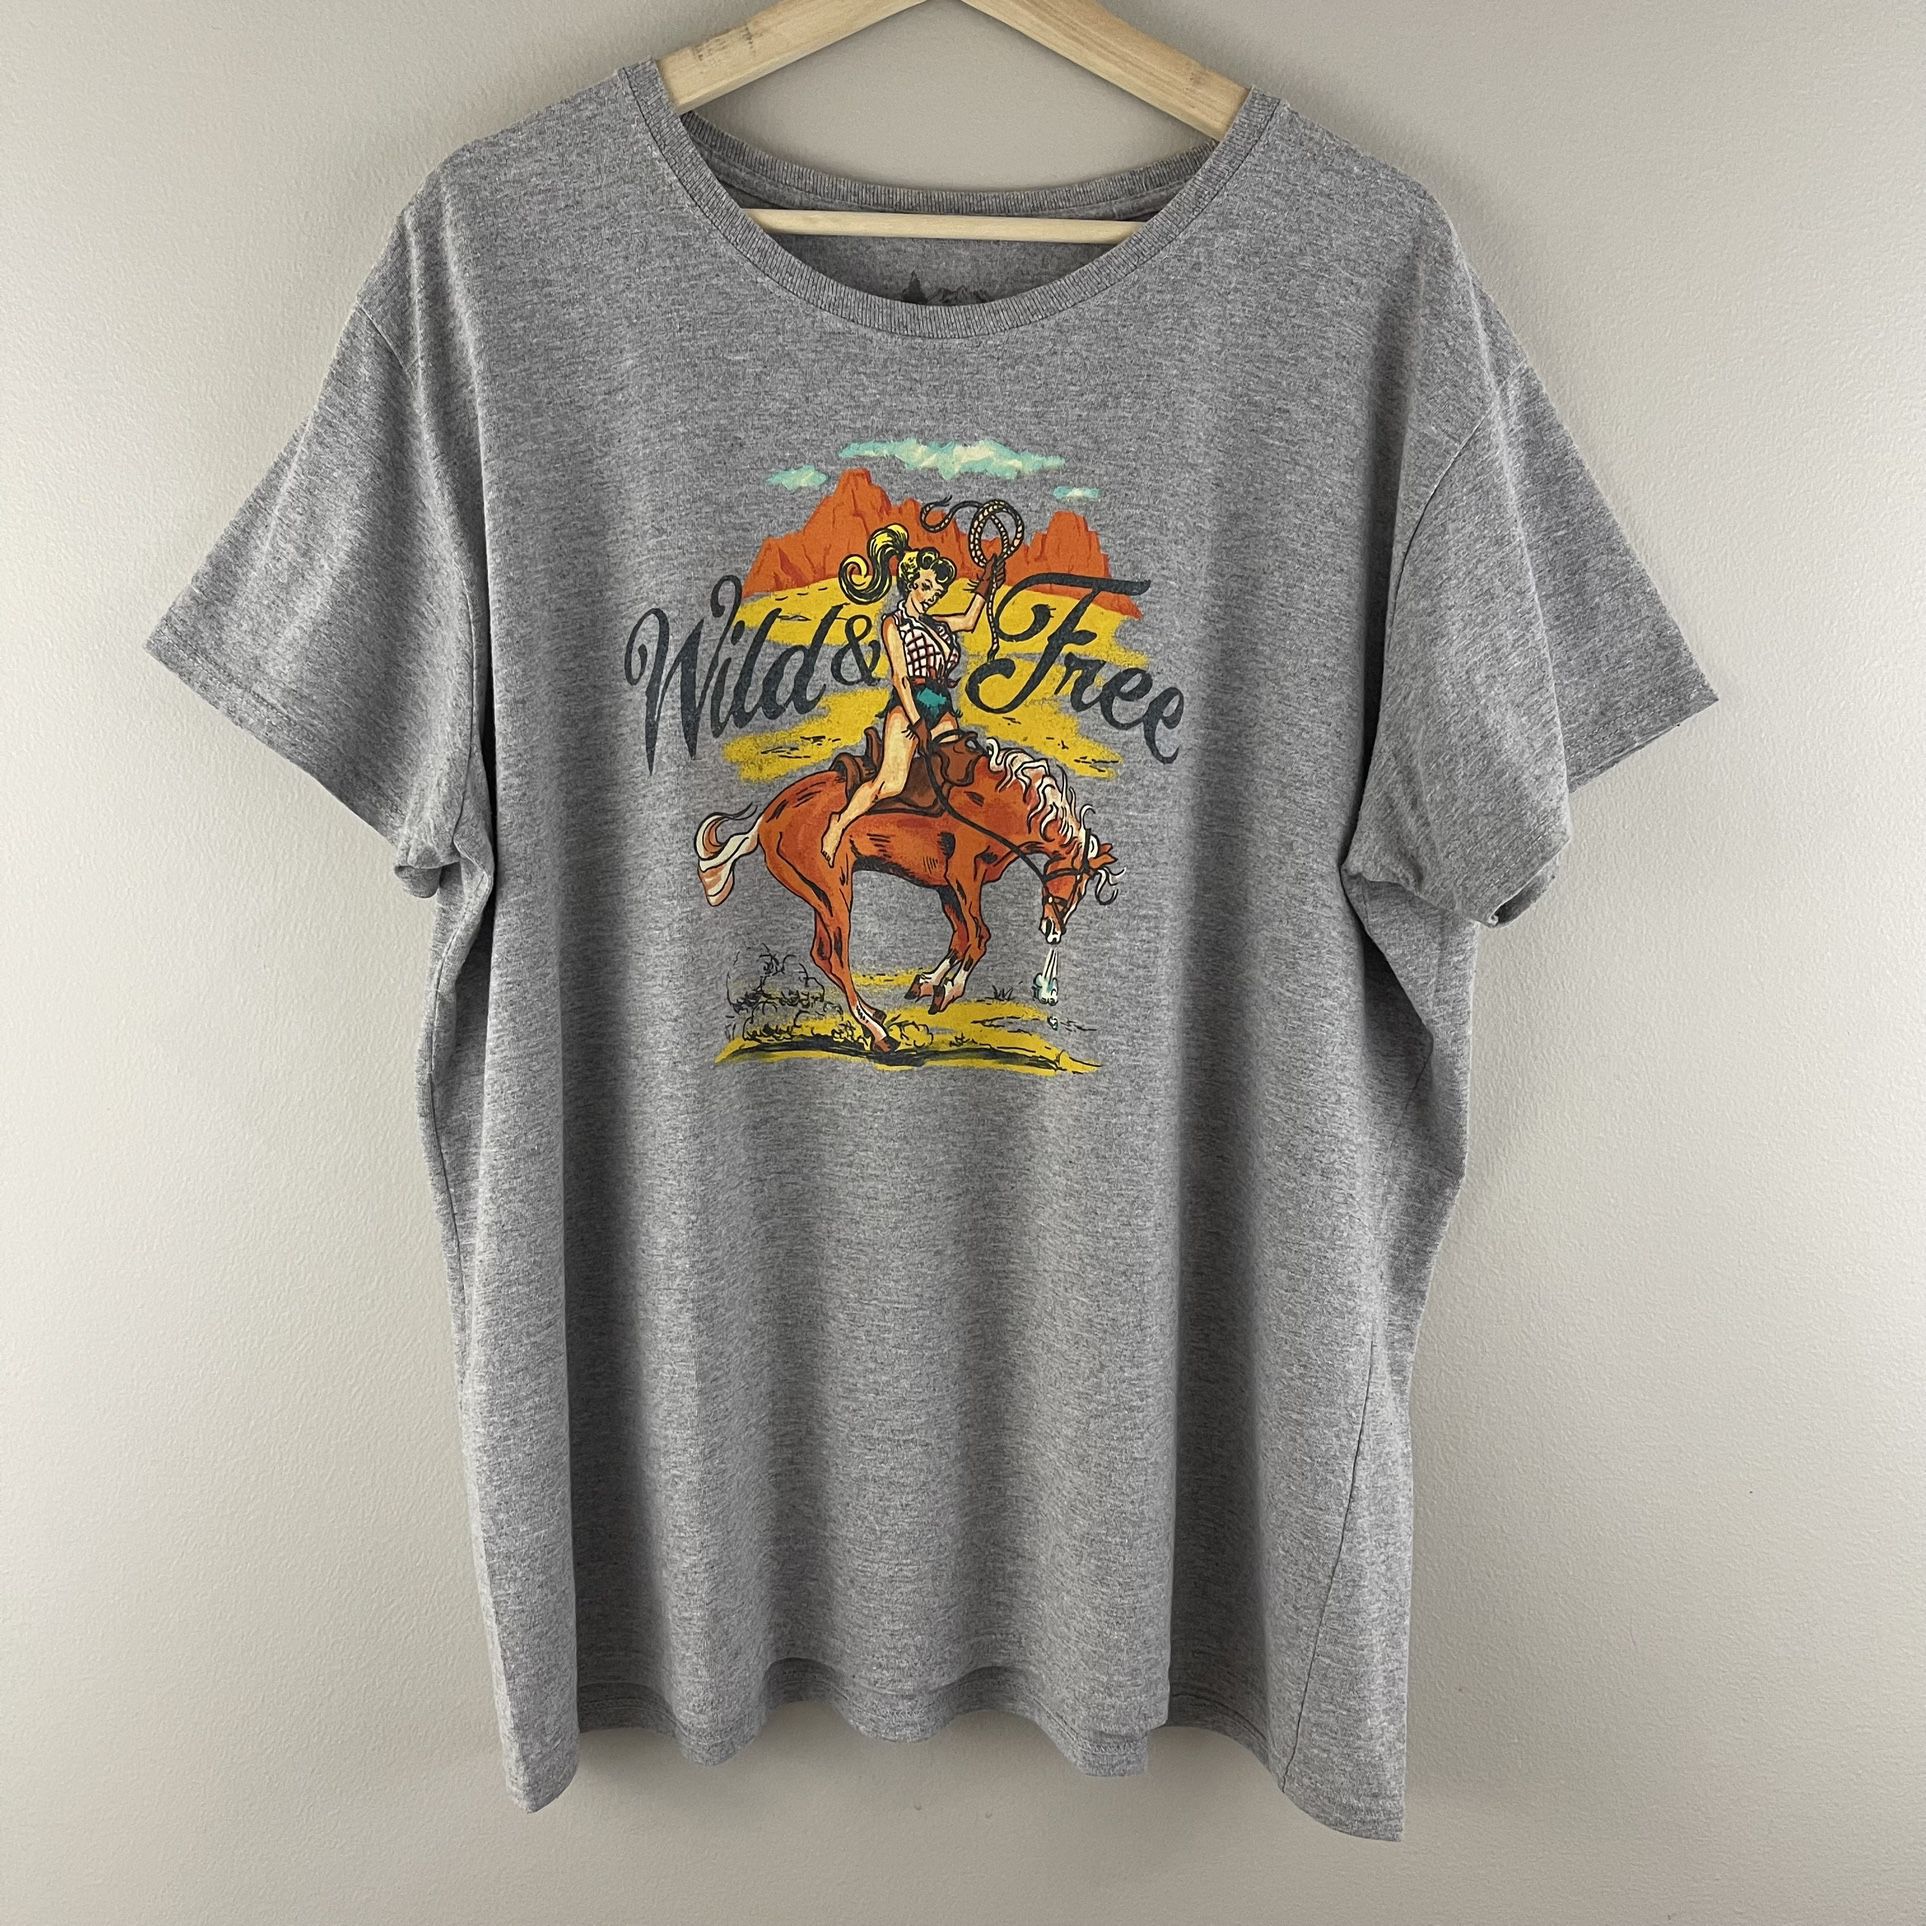 Western Heathered Grey “Wild & Free” Pinup Cowgirl Horse Riding Graphic Tee